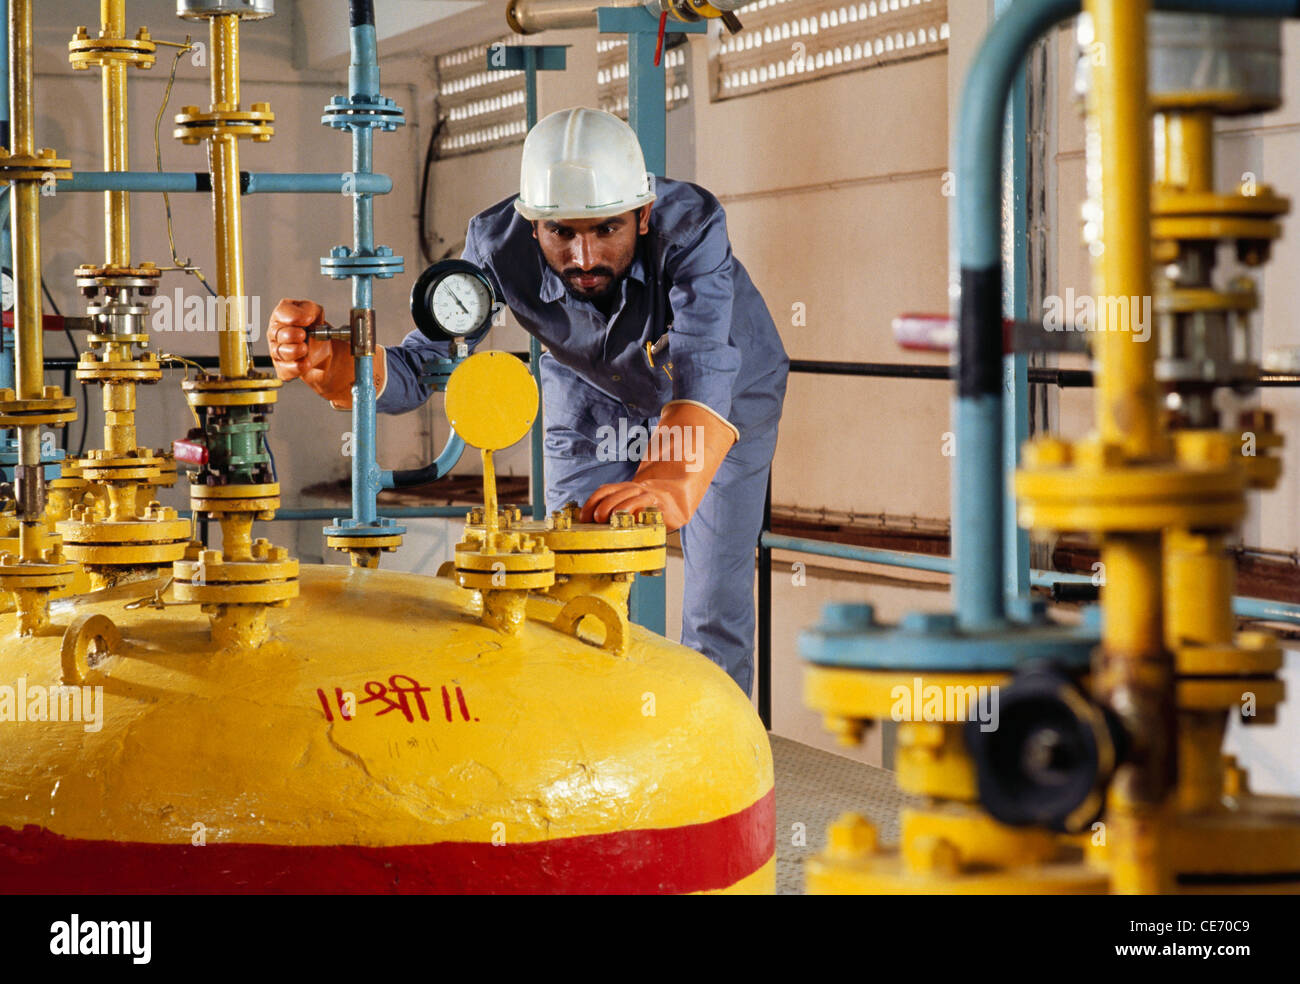 Indian man worker wearing helmet working in chemical factory ; auspicious Shree in Hindi written in red on yellow tank ; india ; asia Stock Photo